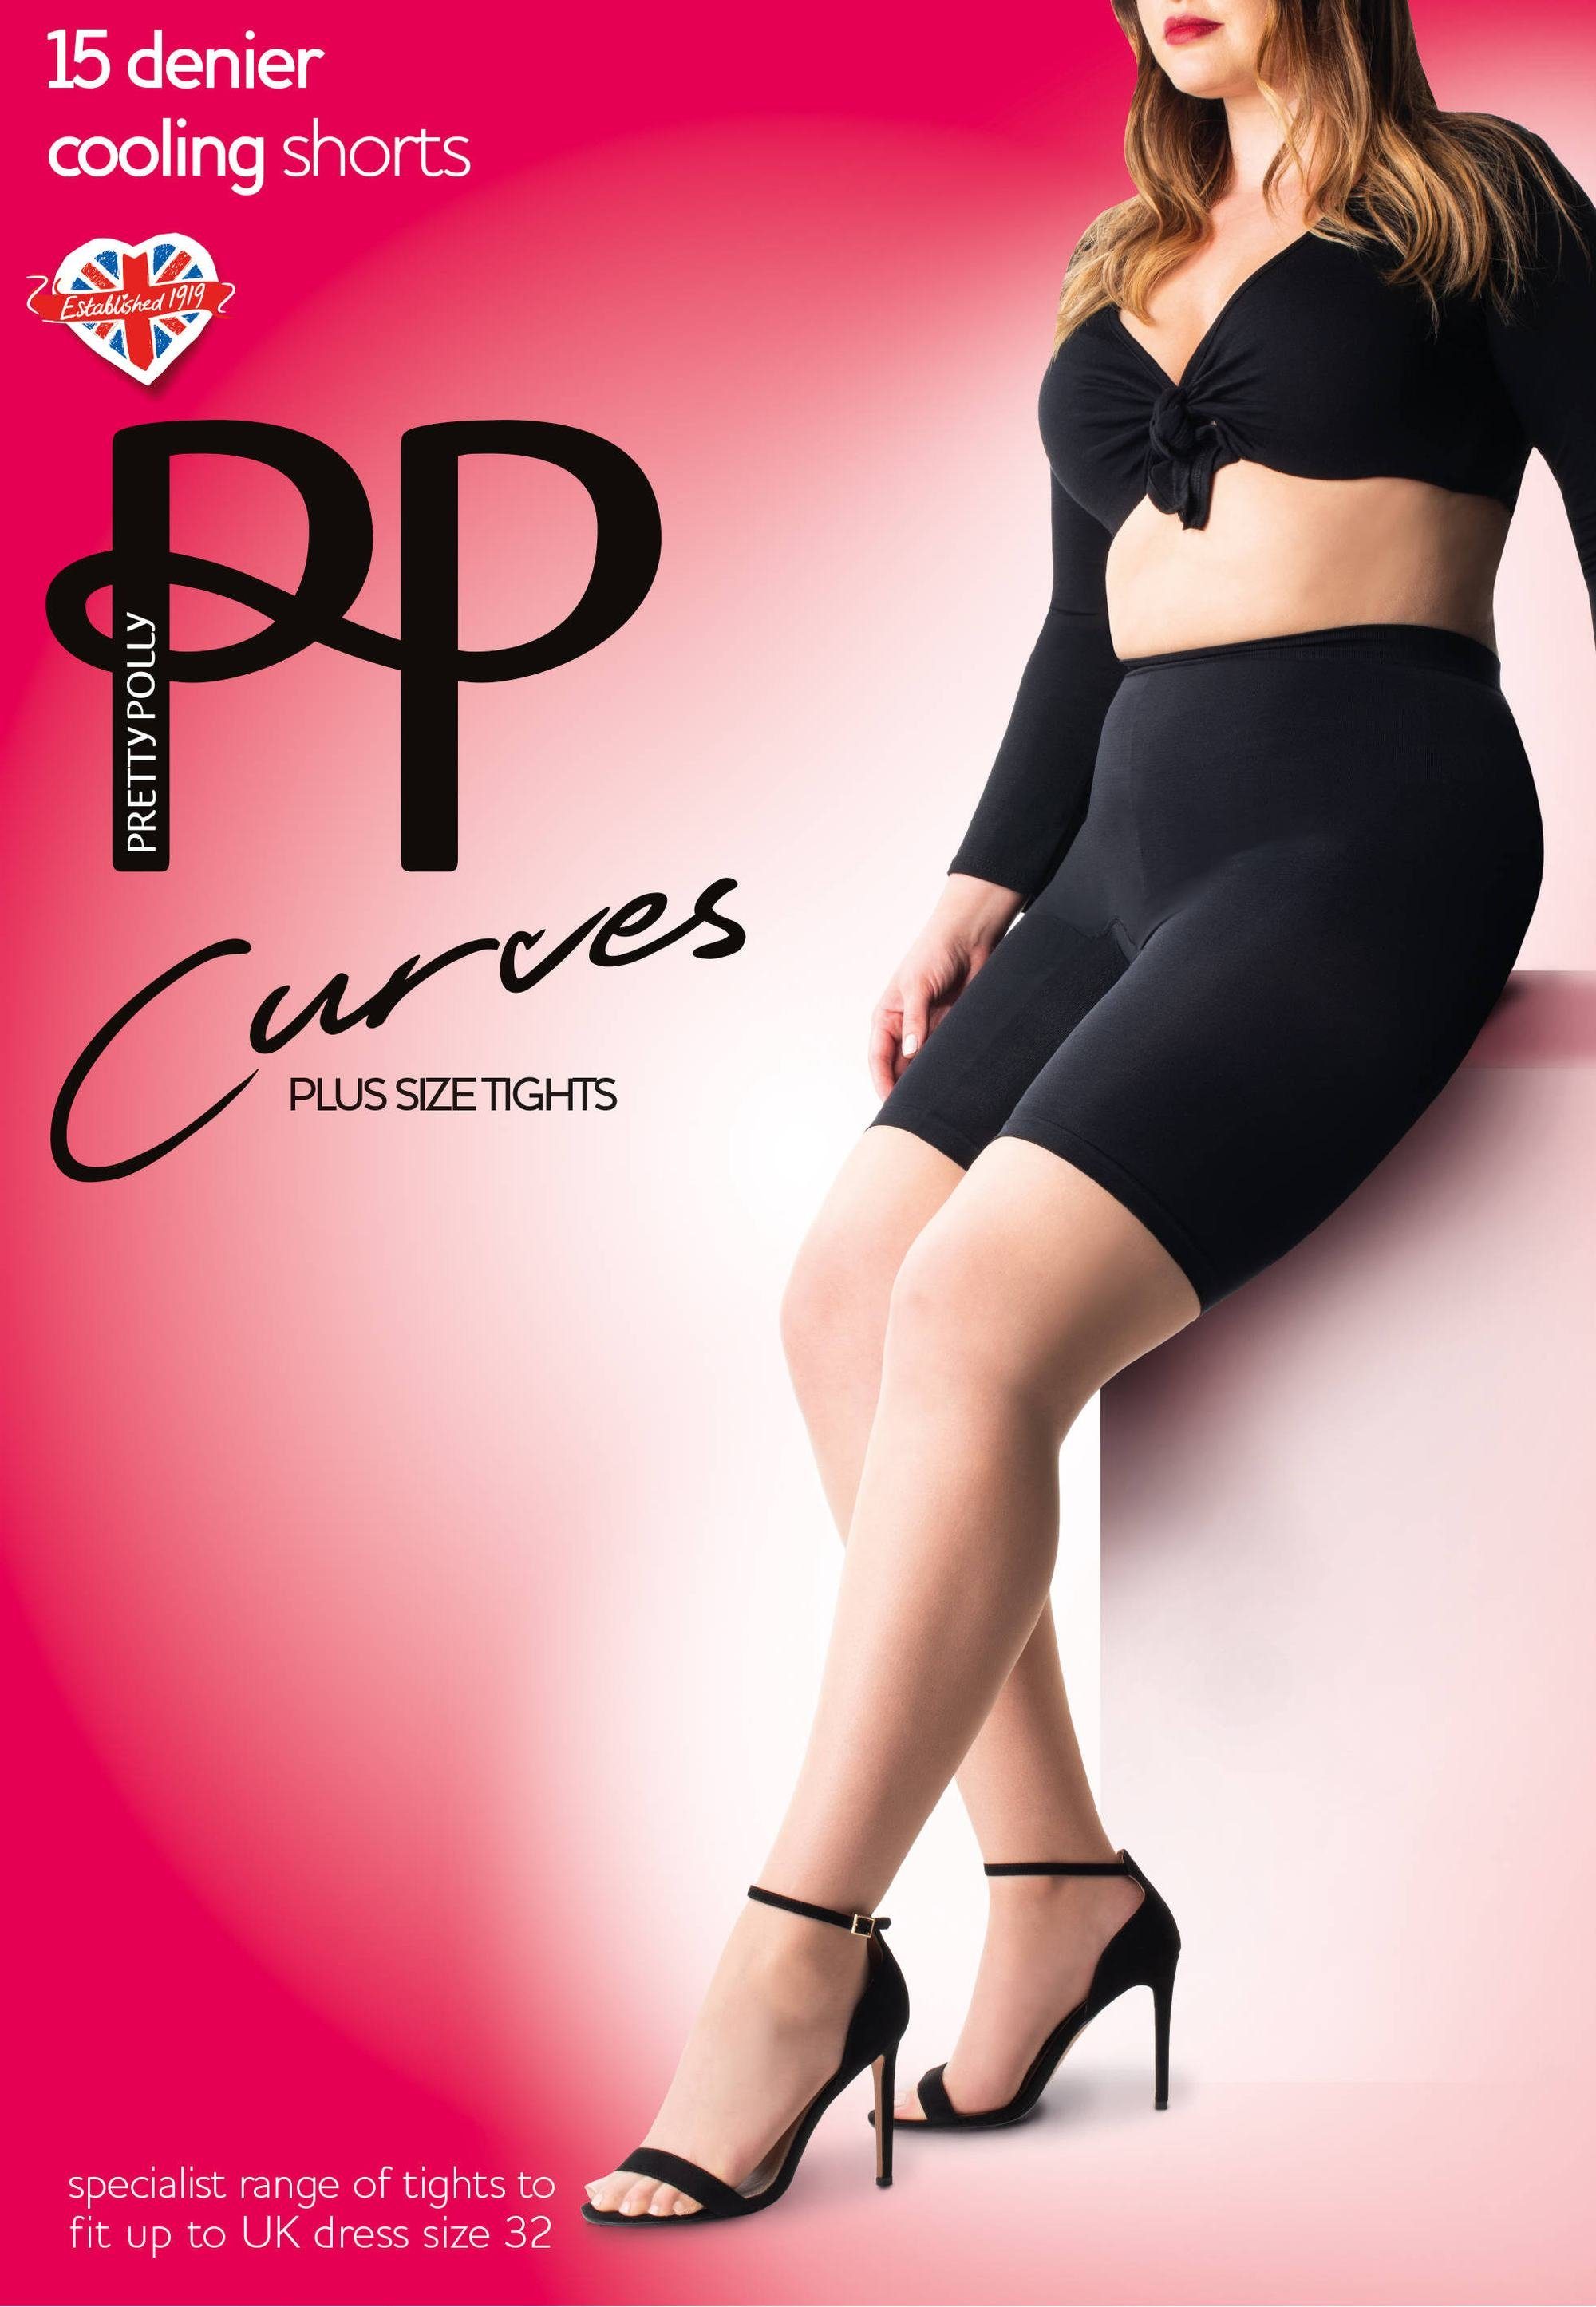 Miederslip Short Curves Cooling Pretty Polly Sheer Black